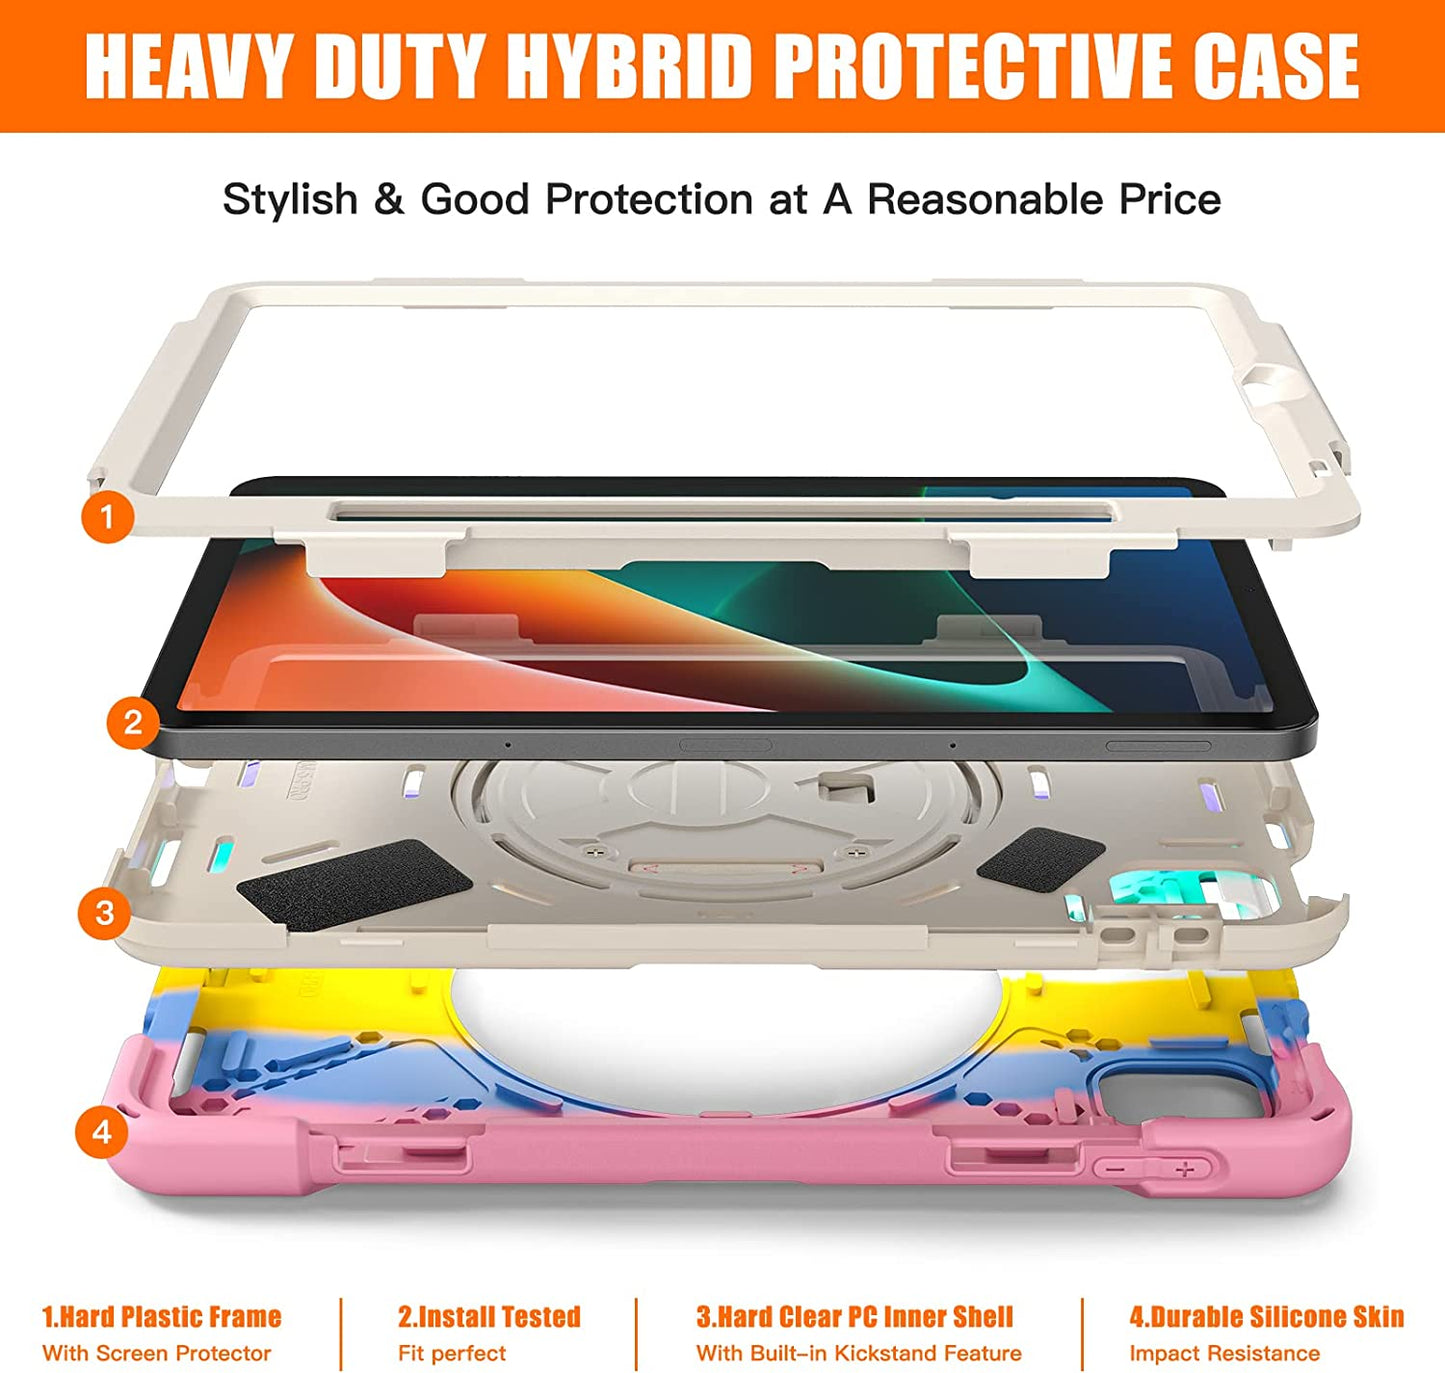 Rugged Case for Xiaomi-Mi-Pad-5 / MiPad-5-Pro 11 inch 2021 w/ Stylus Holder & Kickstand, Portable Heavy Duty Hybrid Shock-Proof Cover with 360? Rotatable Handle, Shoulder Strap (Black)